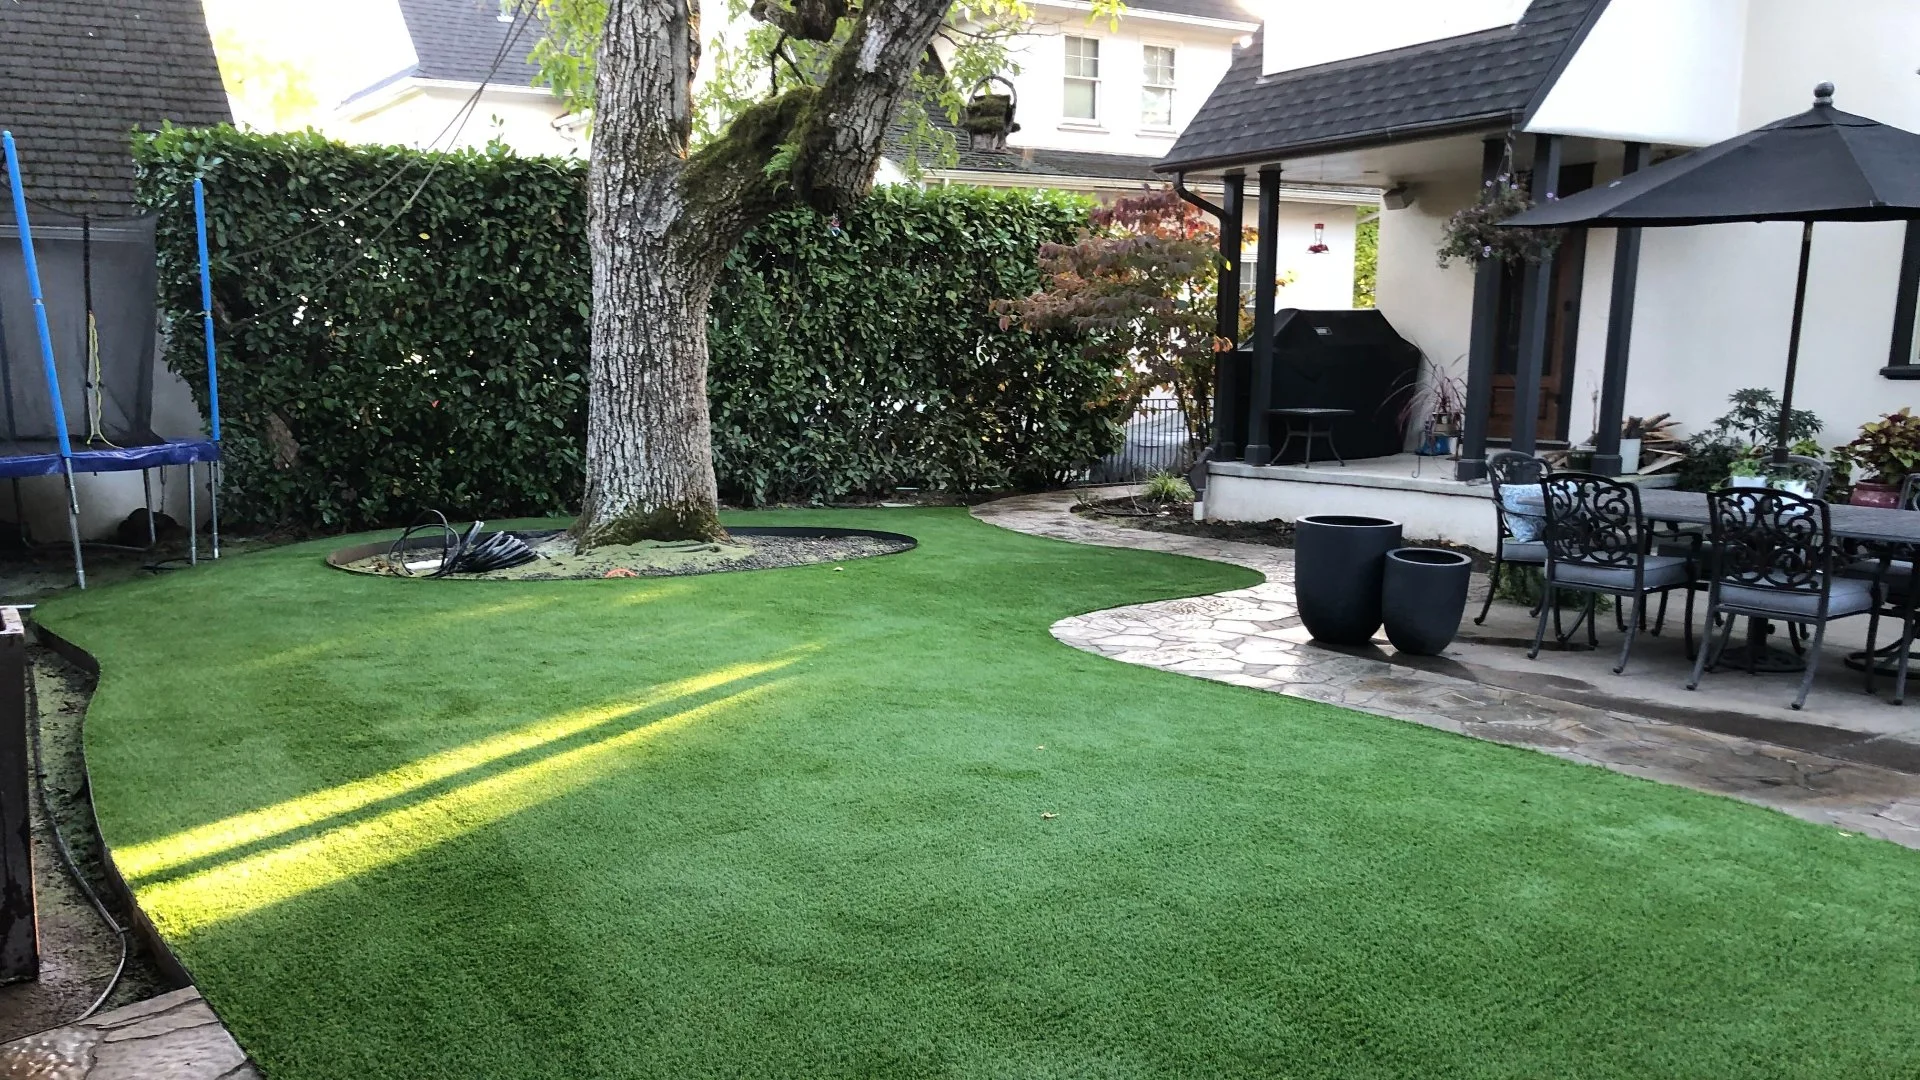 What Should You Know About Artificial Turf Infills?